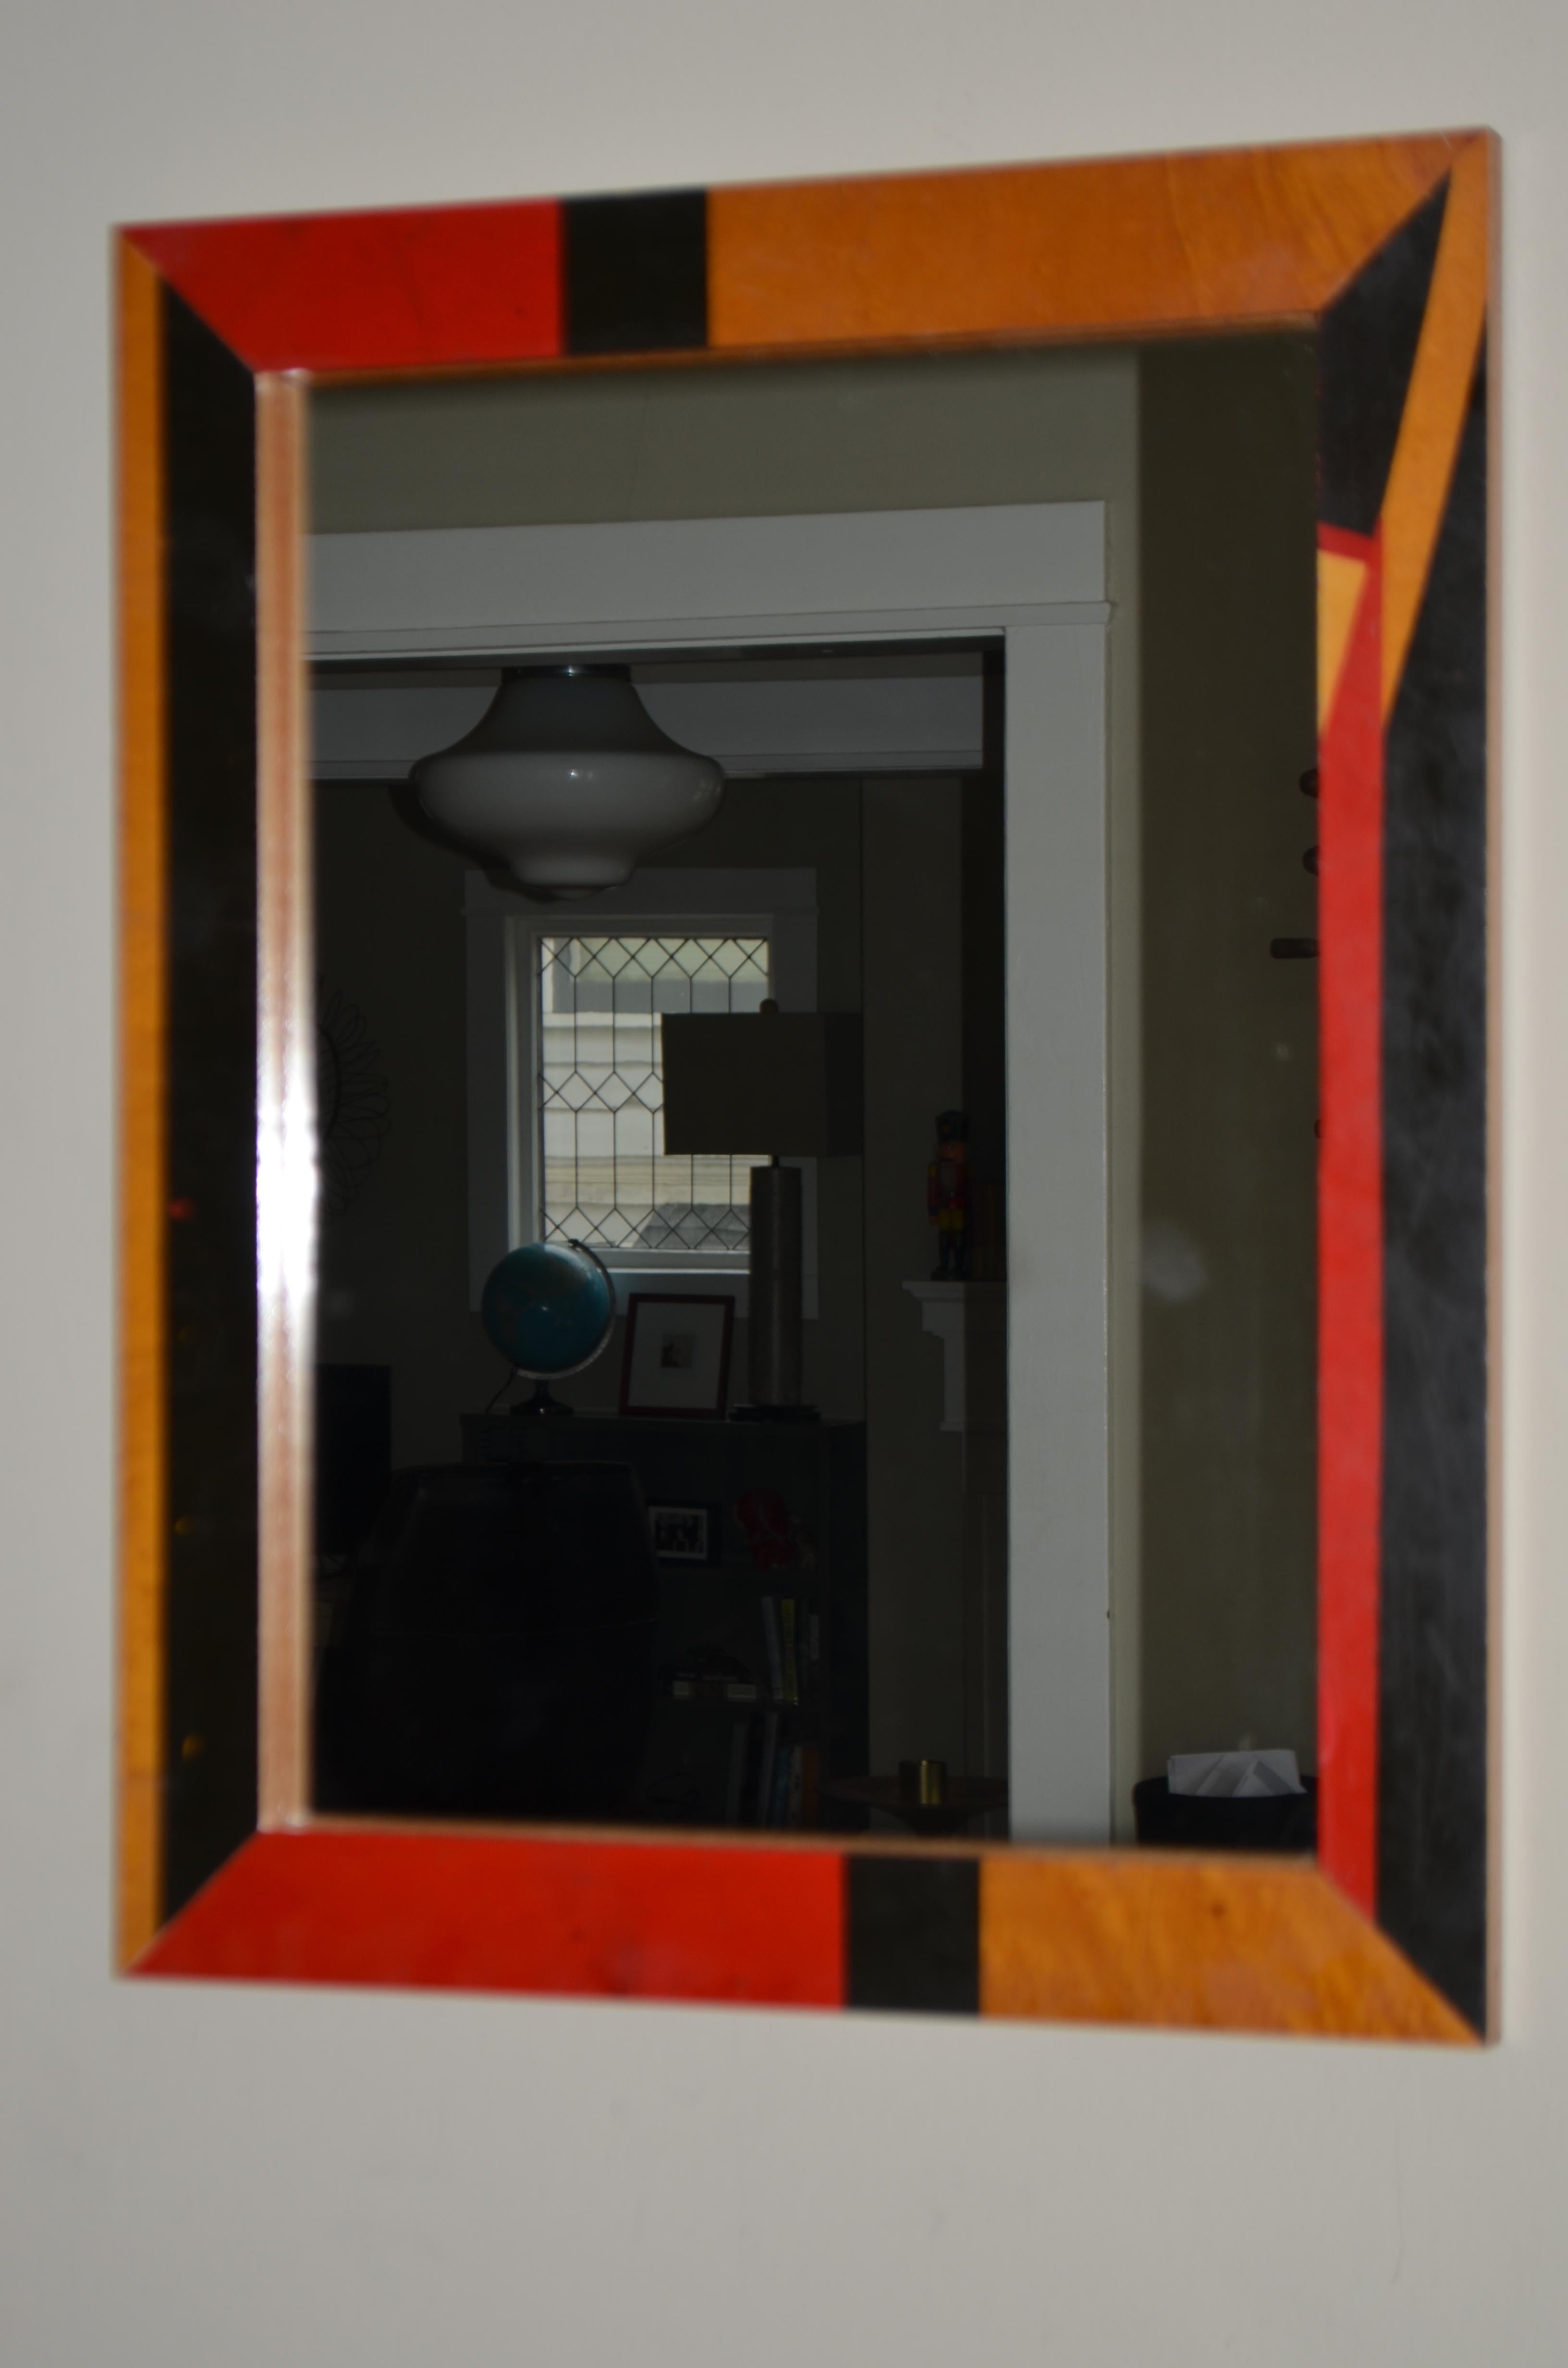 American Wall Mirror Framed in Maple Gym Flooring from a Hundred Year Old High School For Sale